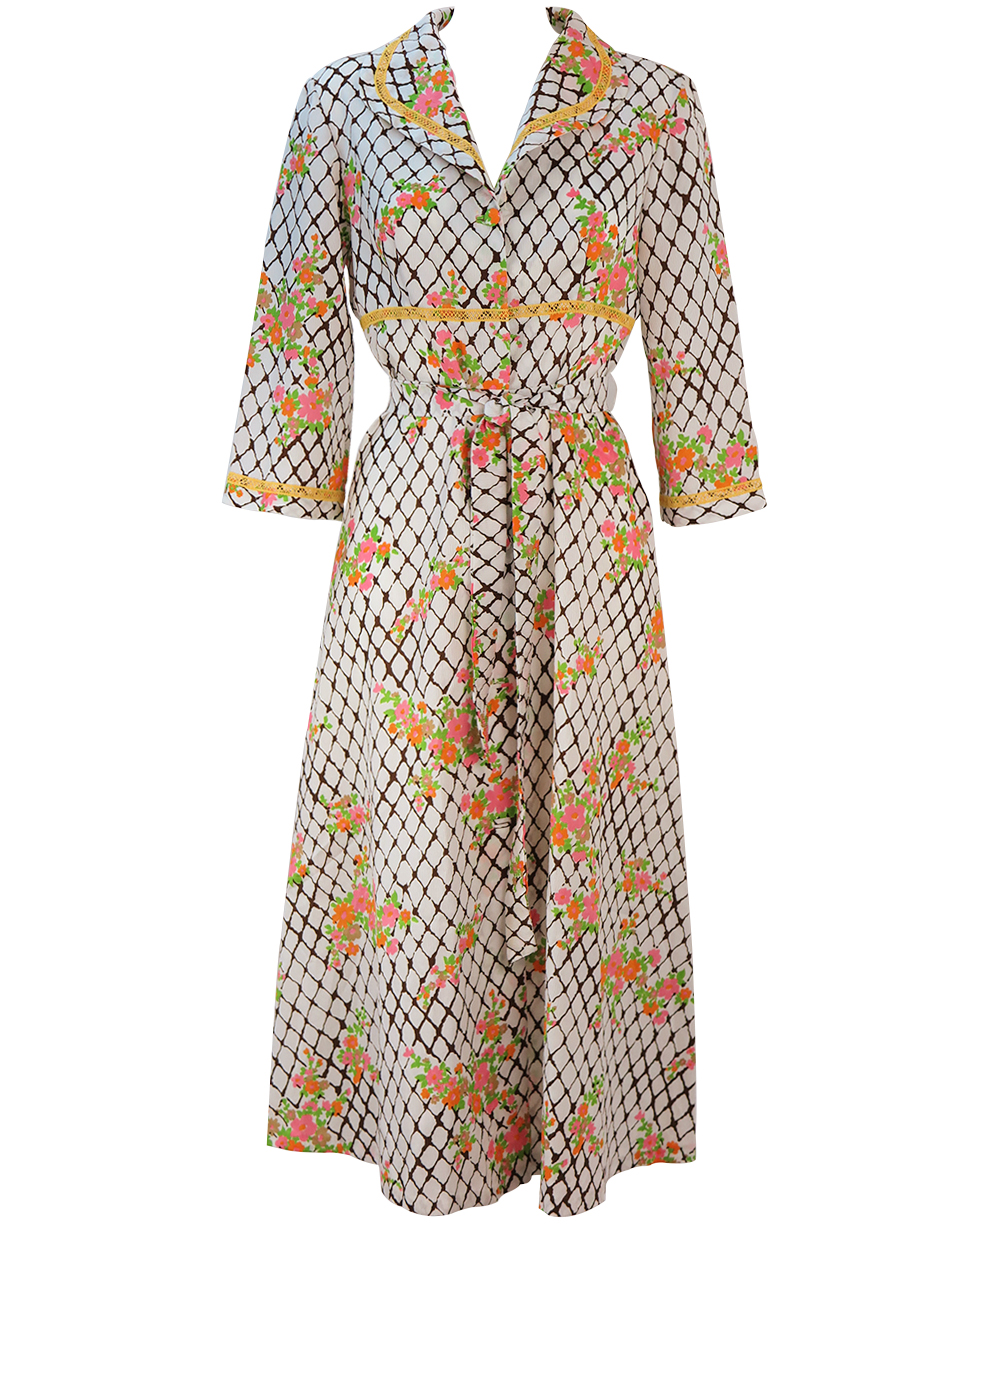 Vintage 70's Long Housecoat Dress with White & Brown Grid Pattern ...